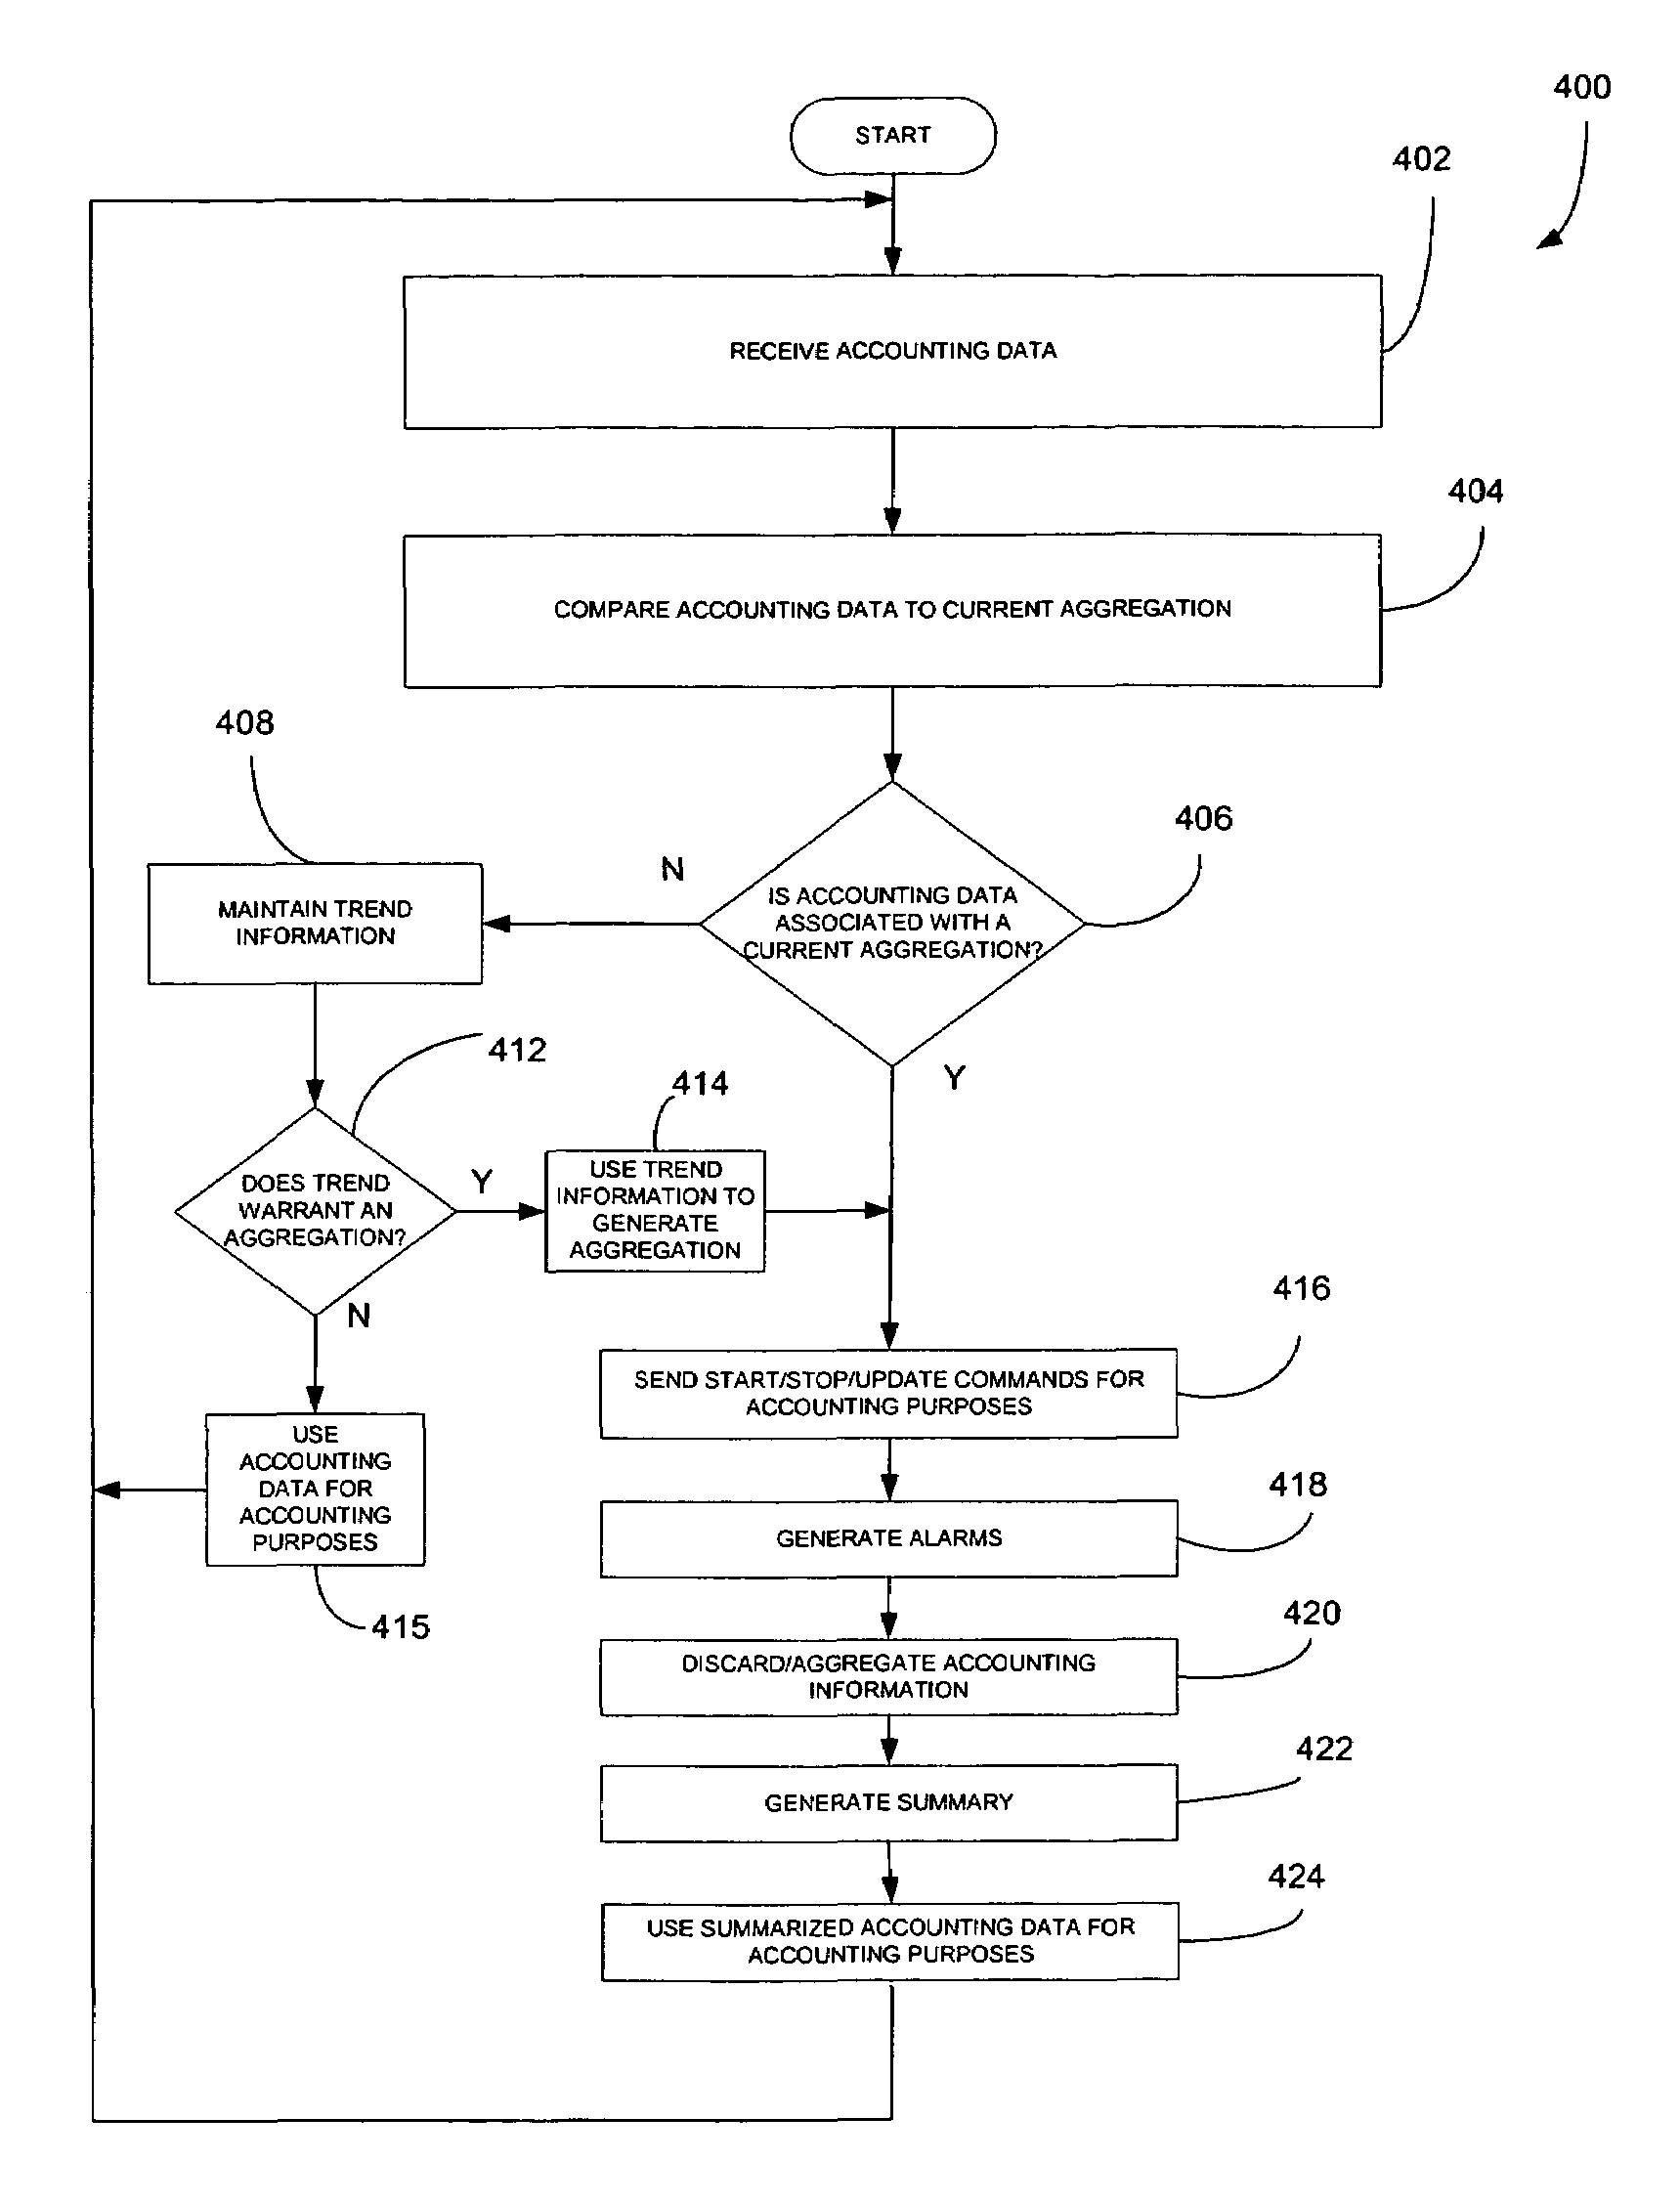 System, method and computer program product for processing network accounting information